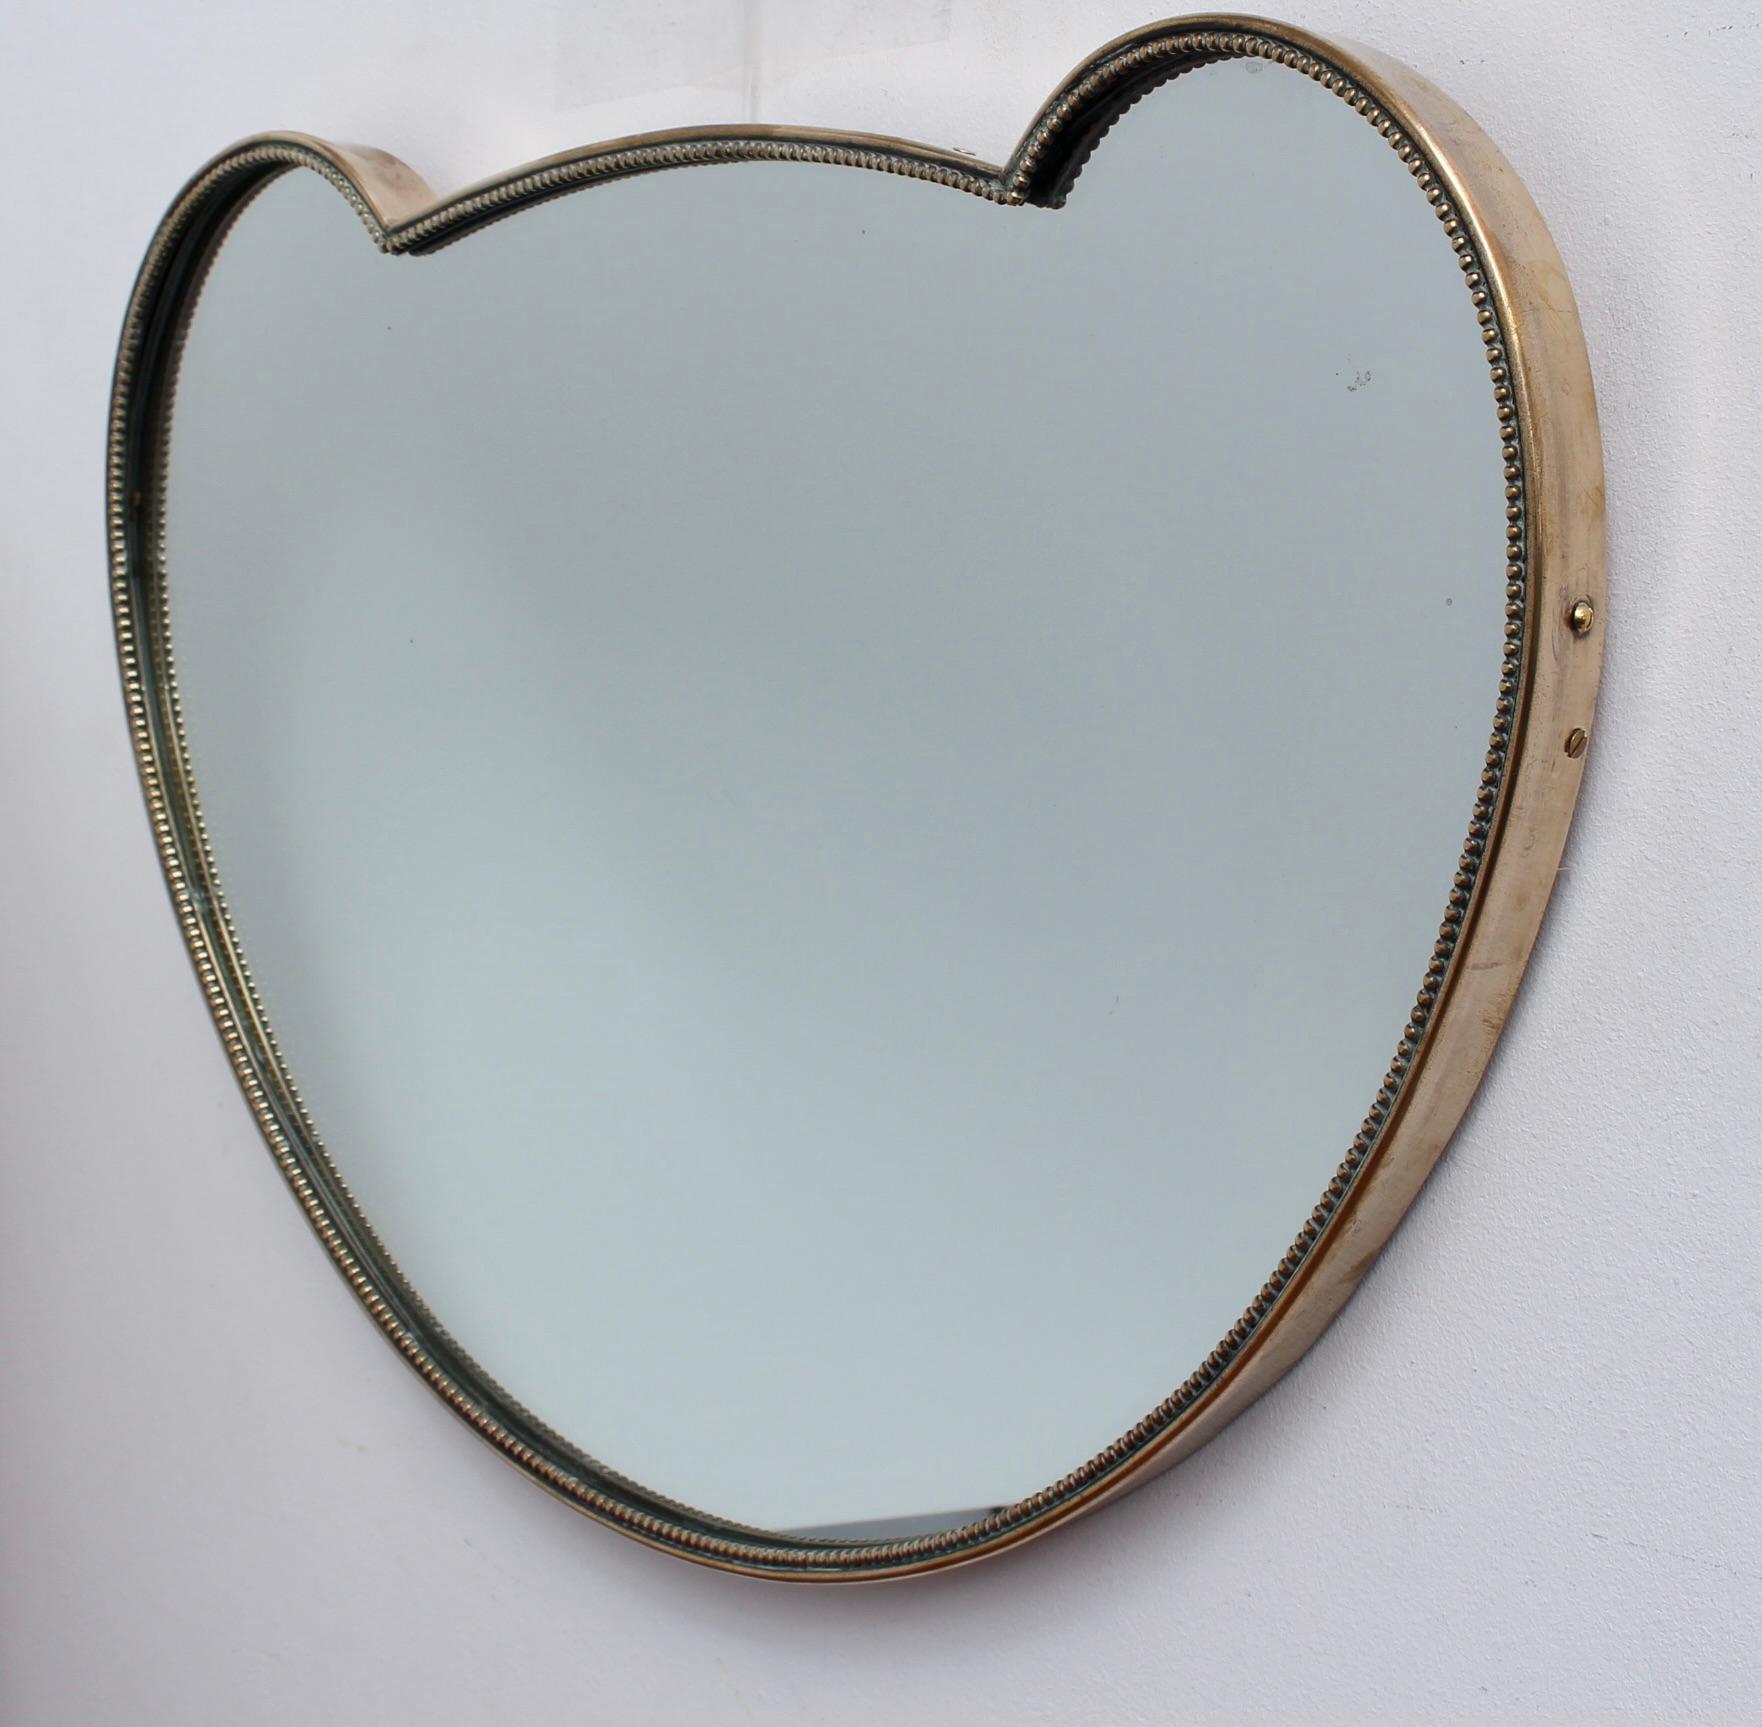 Italian Vintage Wall Mirror with Brass Frame (circa 1950s) - Small For Sale 2